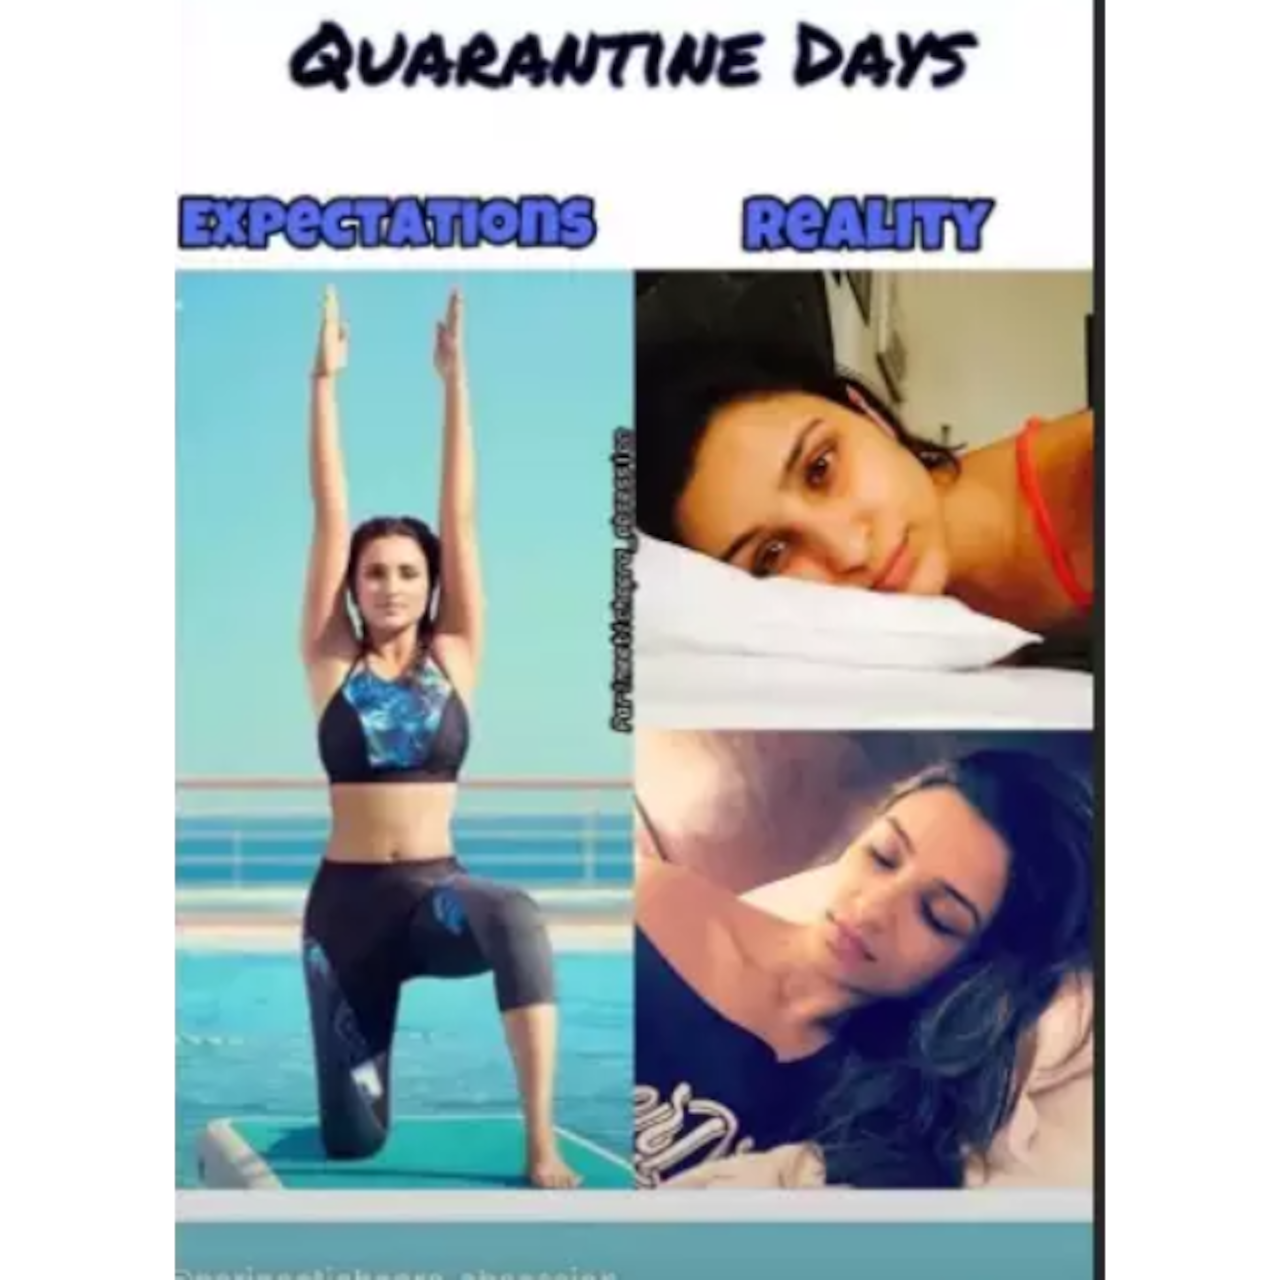 Deepika Padukone Priyanka Chopra And 4 Other Actresses Expectations V S Reality Posts Are Oh